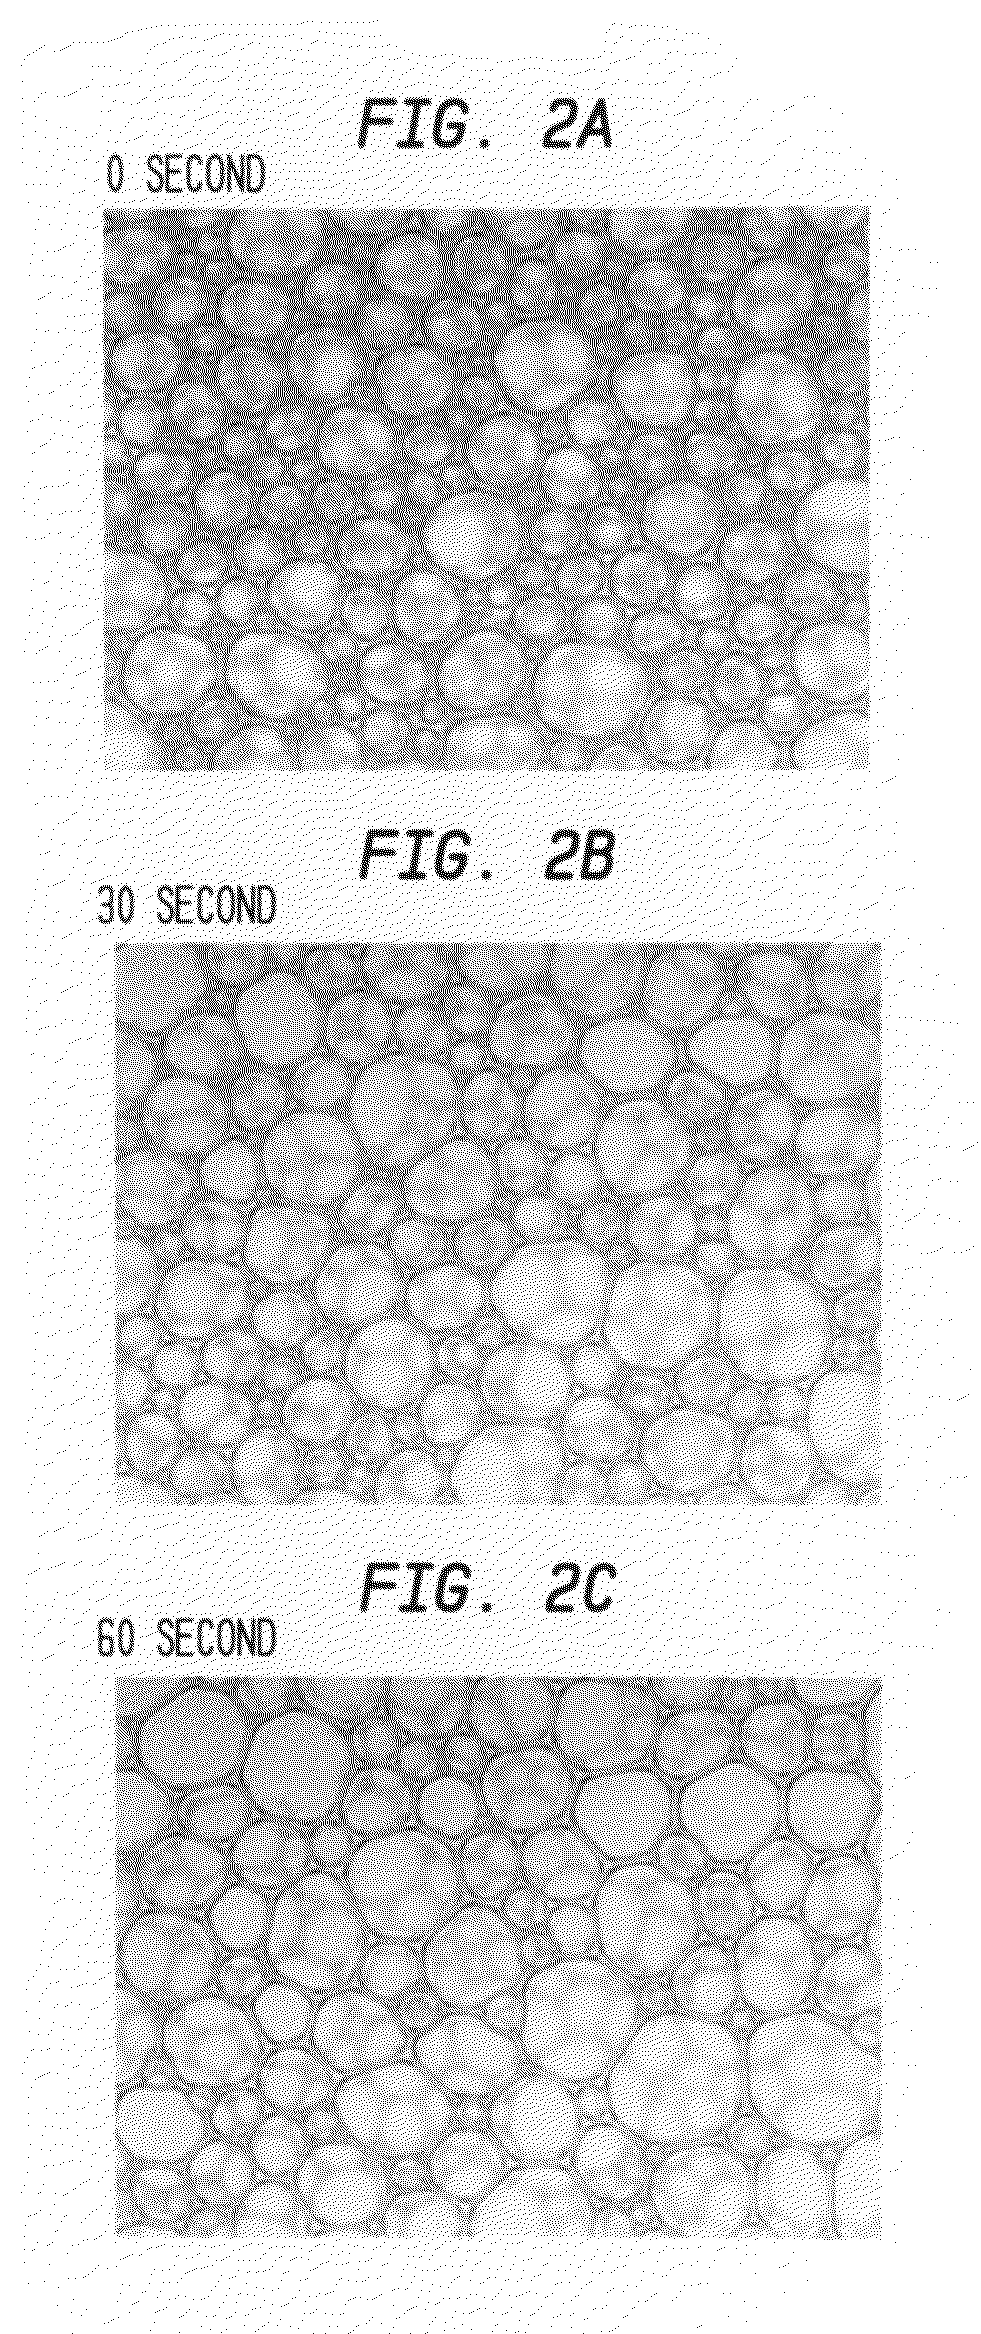 Antimicrobial foam hand soap comprising inulin or an inulin surfactant